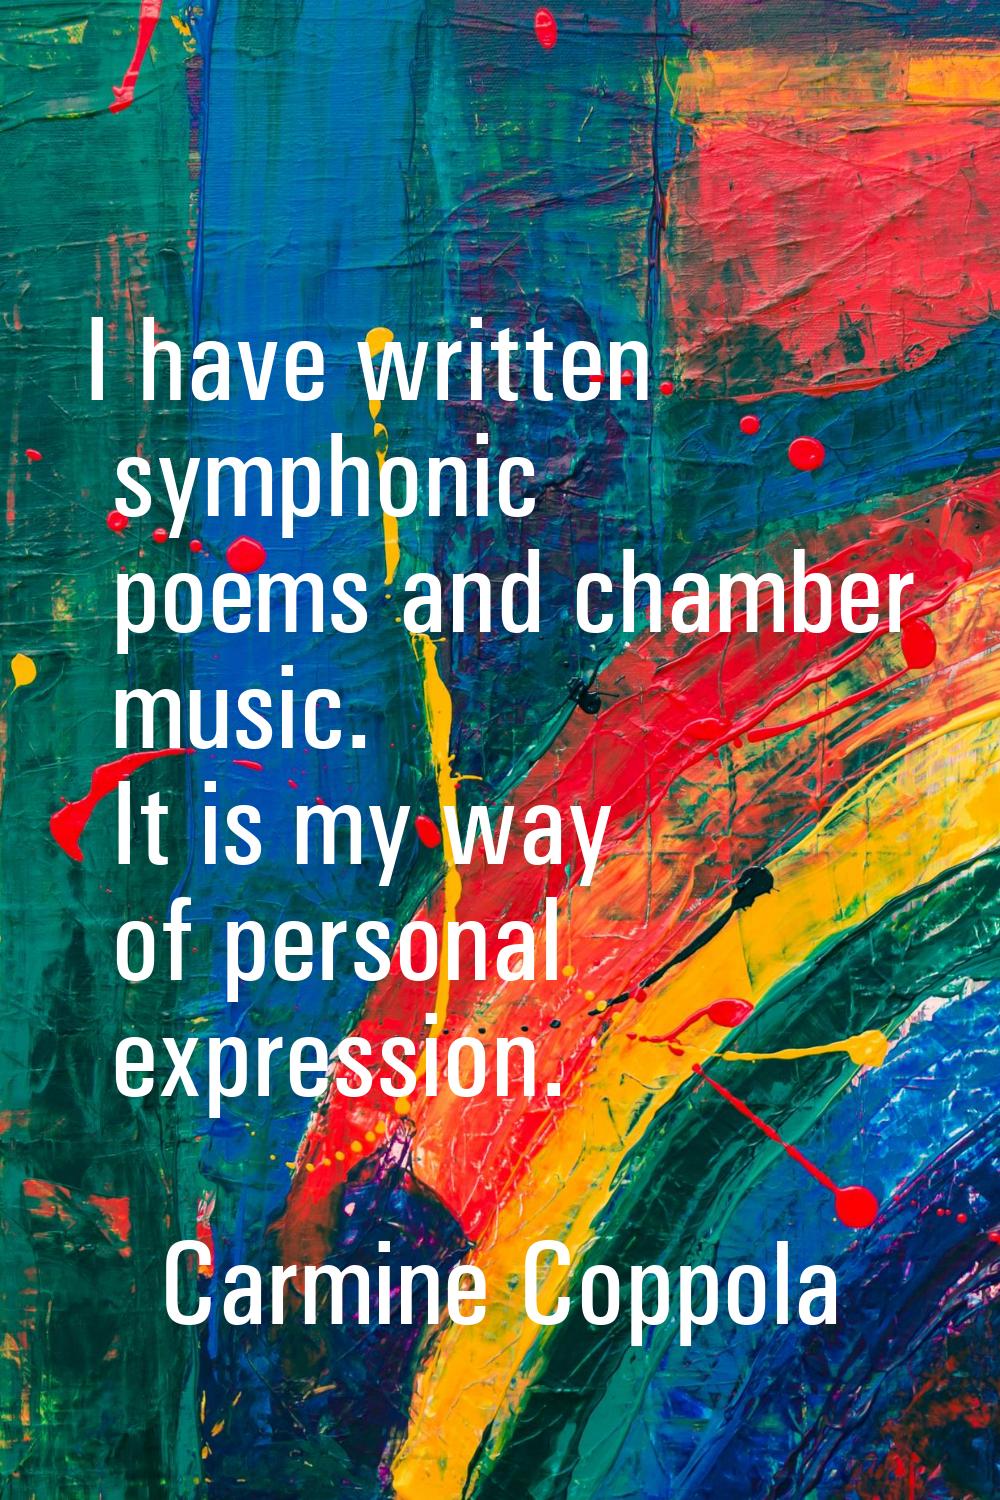 I have written symphonic poems and chamber music. It is my way of personal expression.